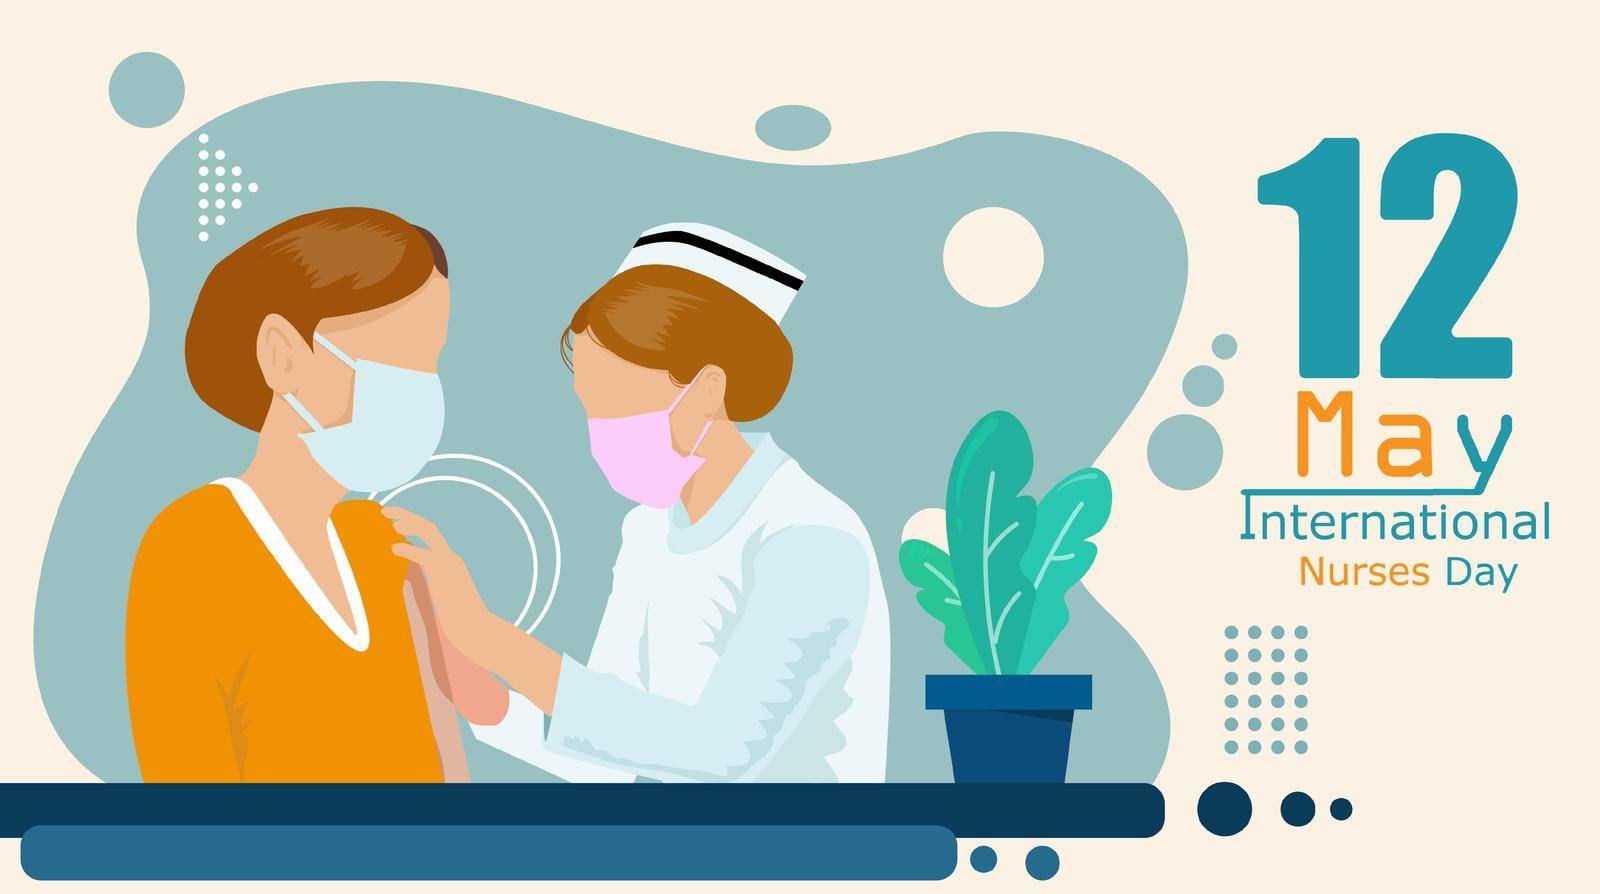 nurse day ,doctor and nurse - COVID-19 pandemic concept, vector illustration stock illustration